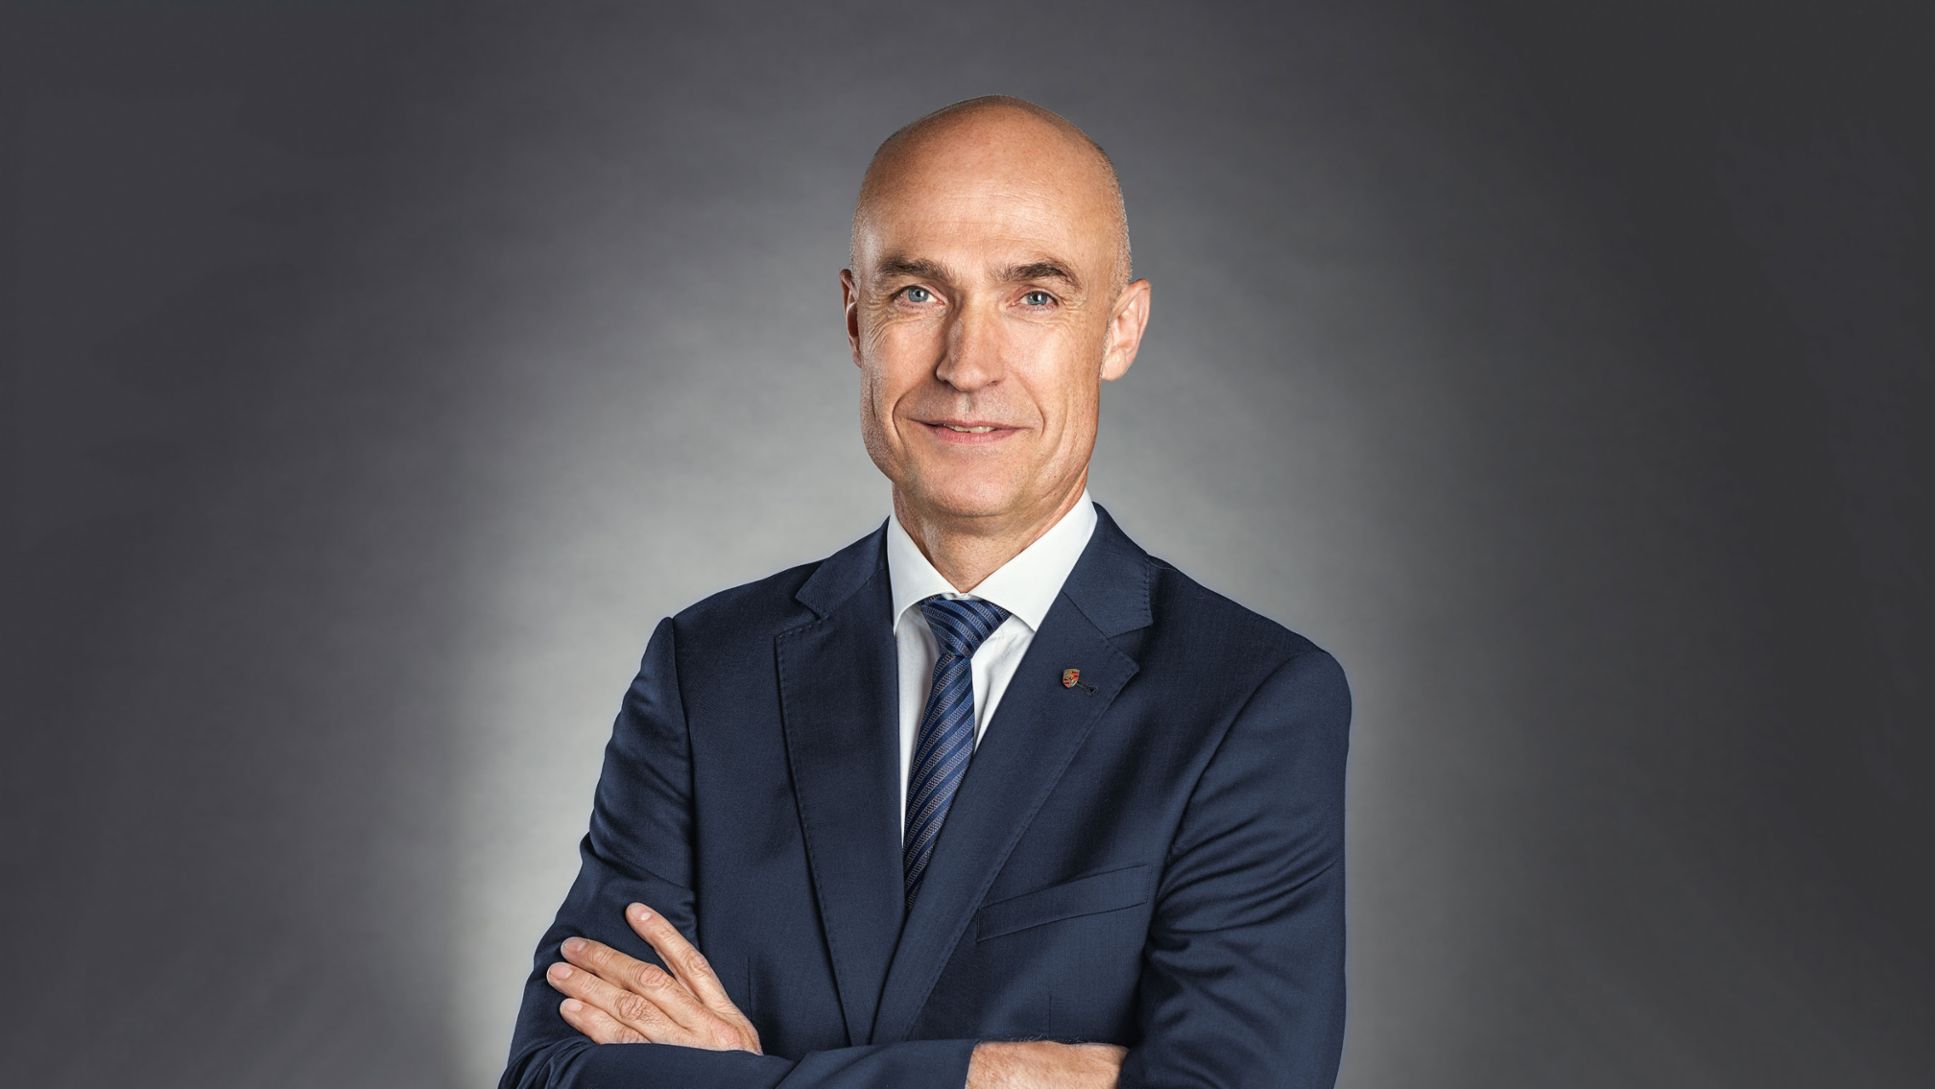 Manfred Bräunl, CEO of Porsche Middle East and Africa FZE (as from March 1, 2019), Porsche AG